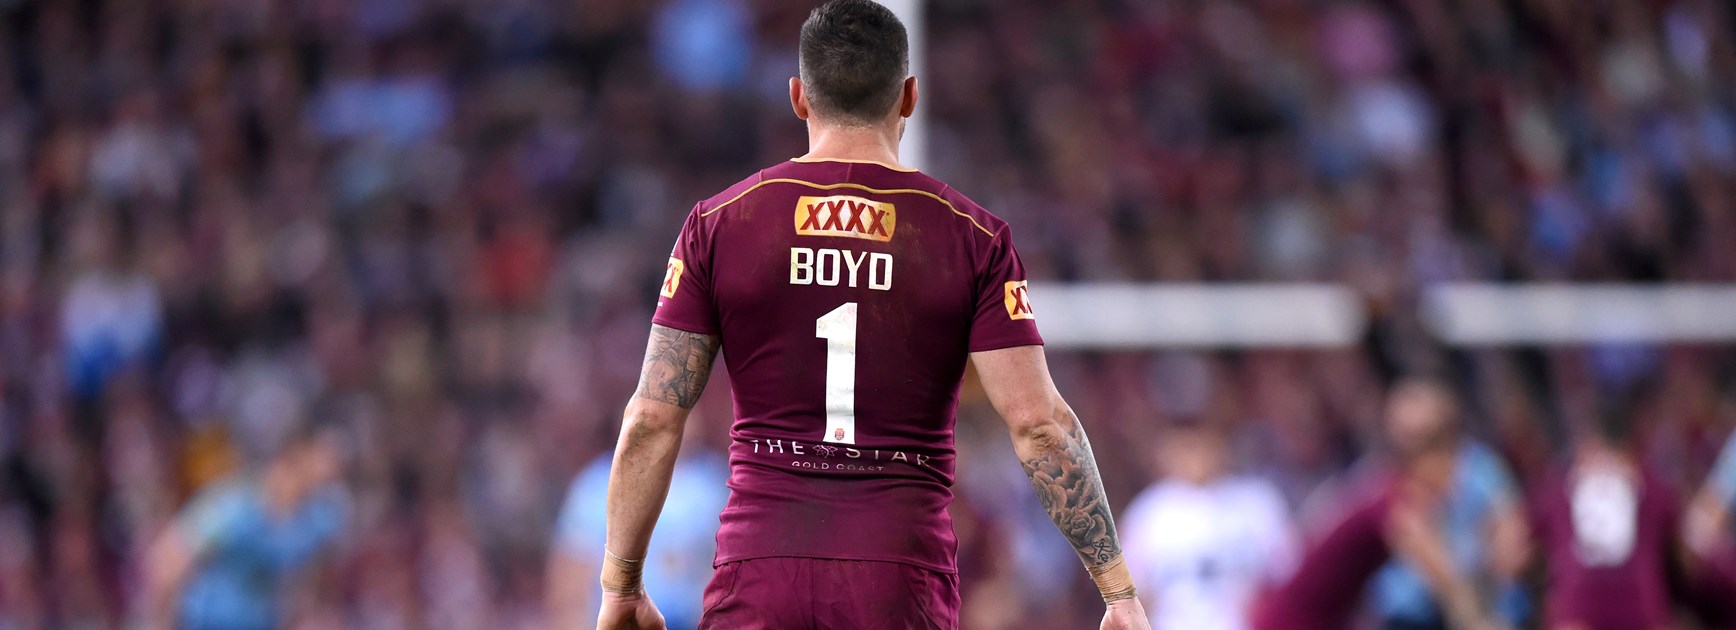 Boyd To Focus On Broncos